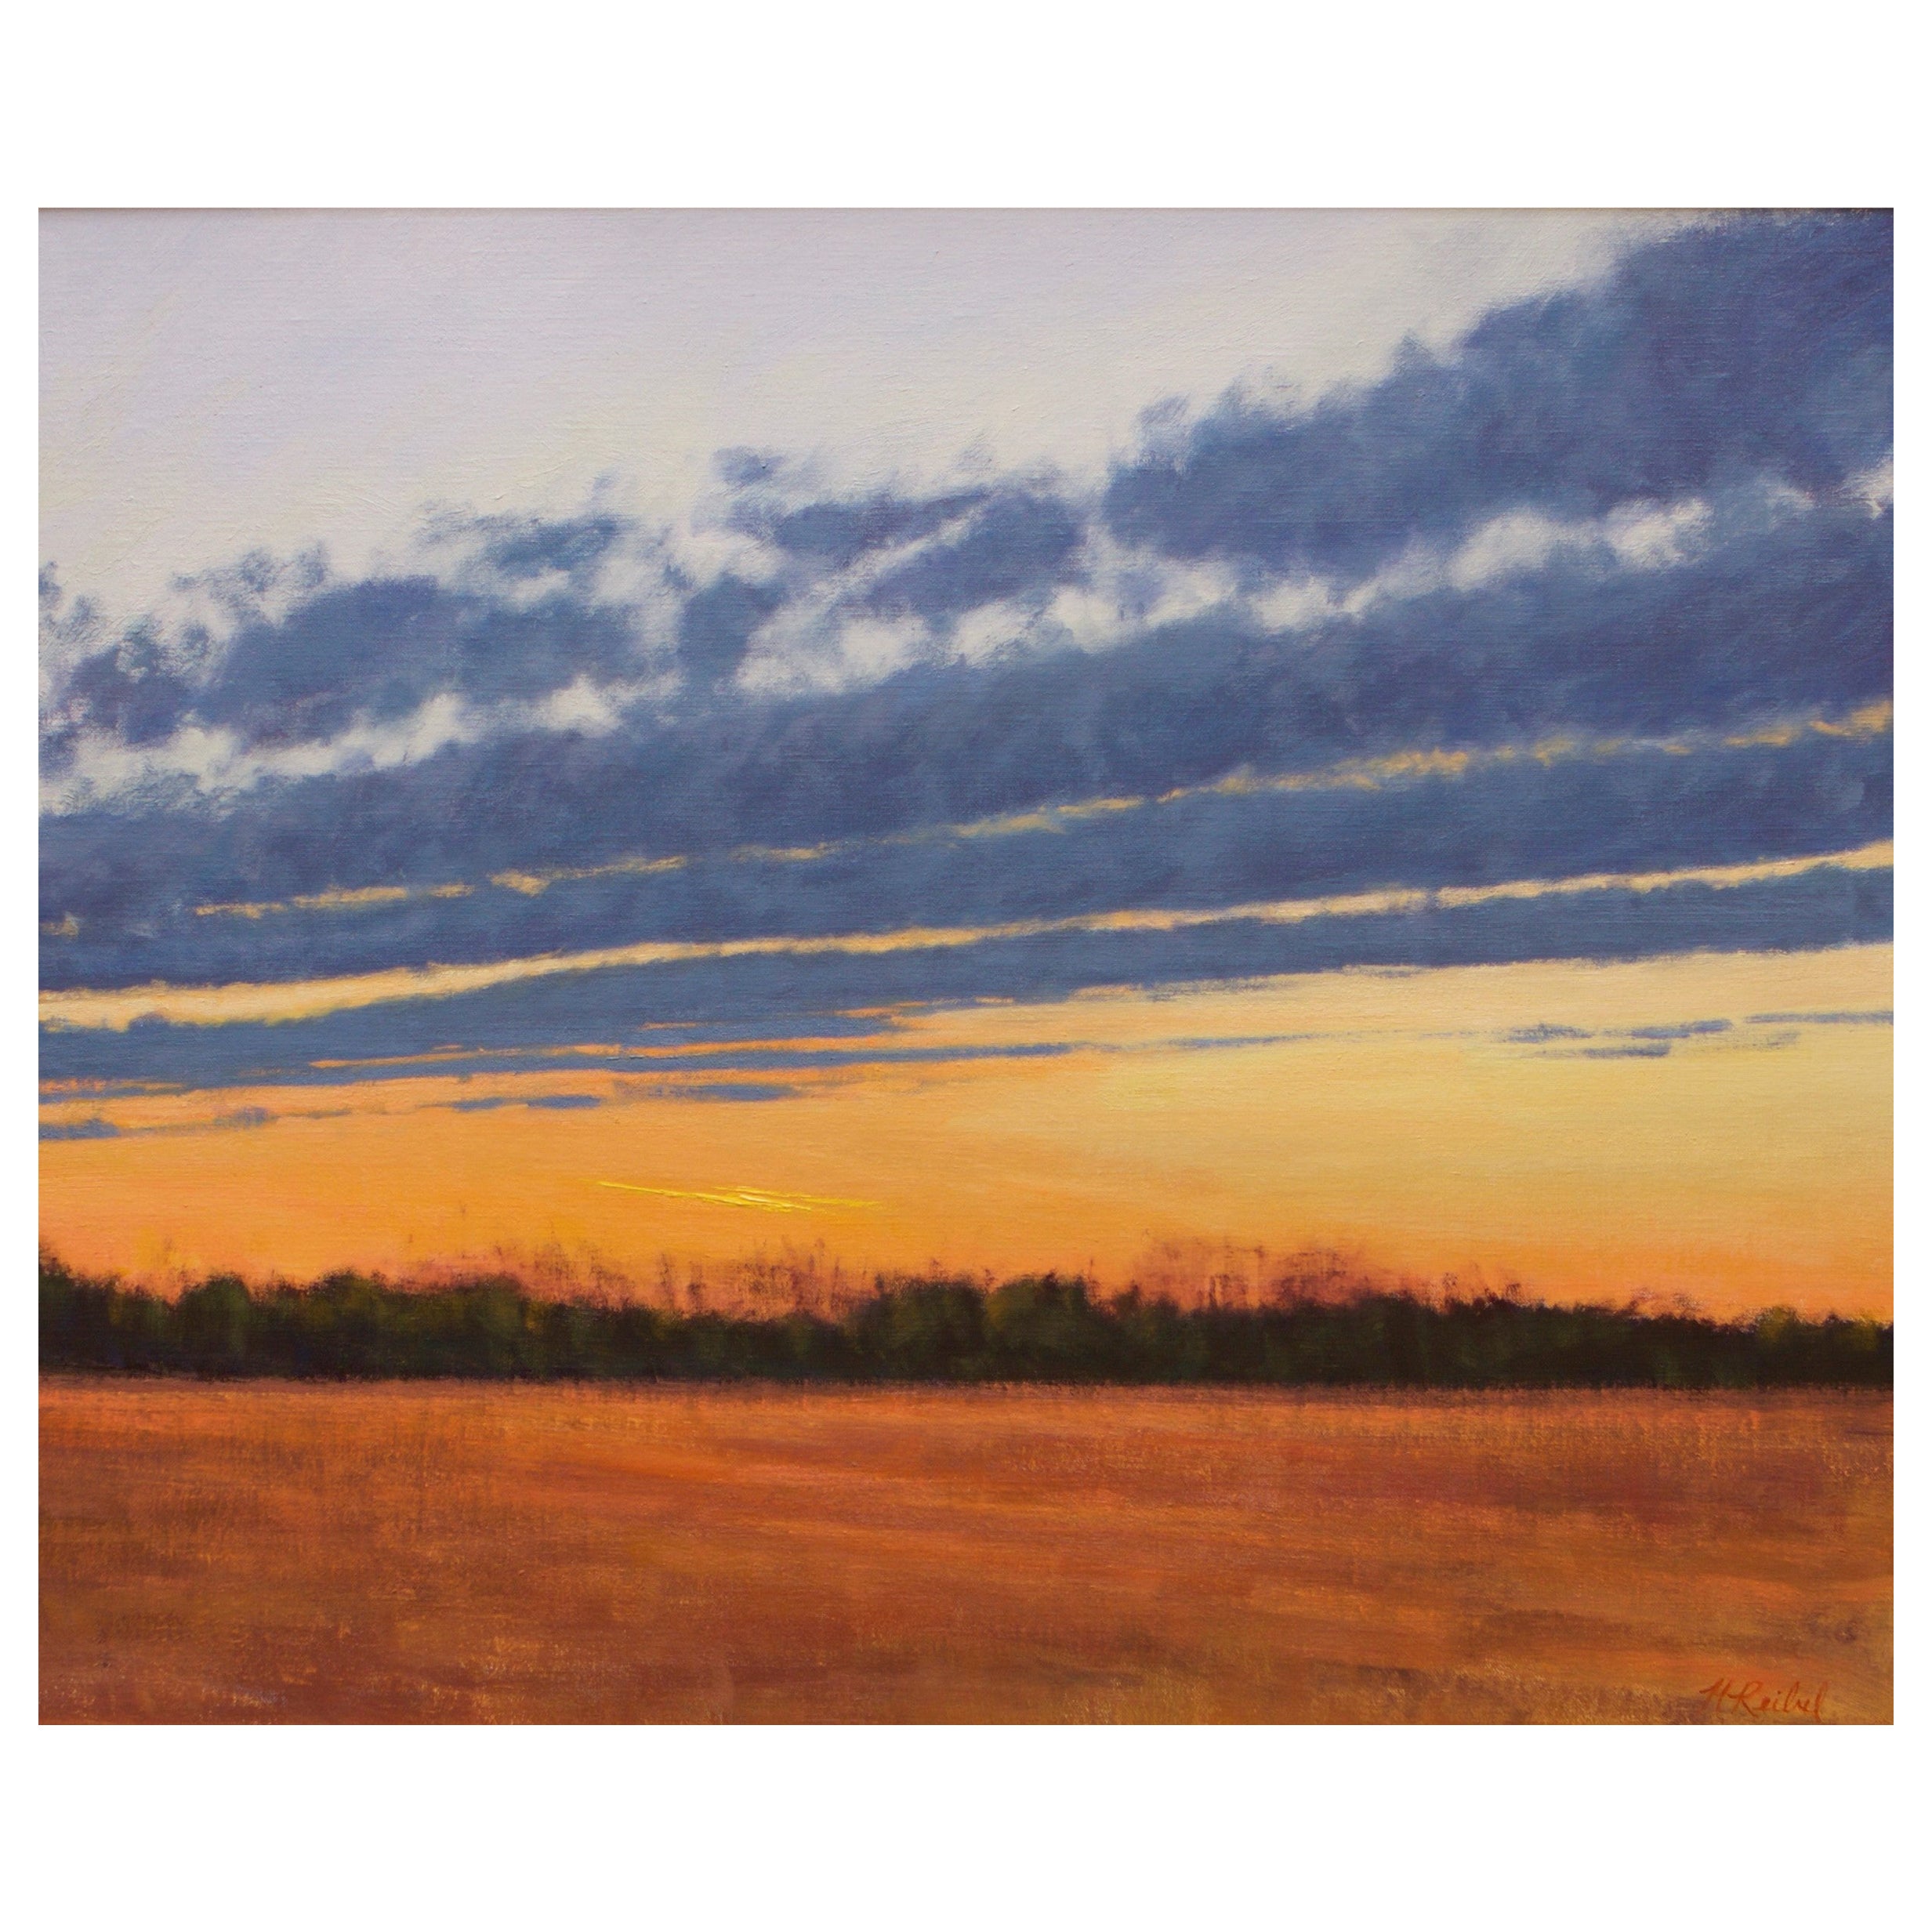 Oil on Canvas Framed Painting "Clearing Skies over the Marsh", by Michael Reibel